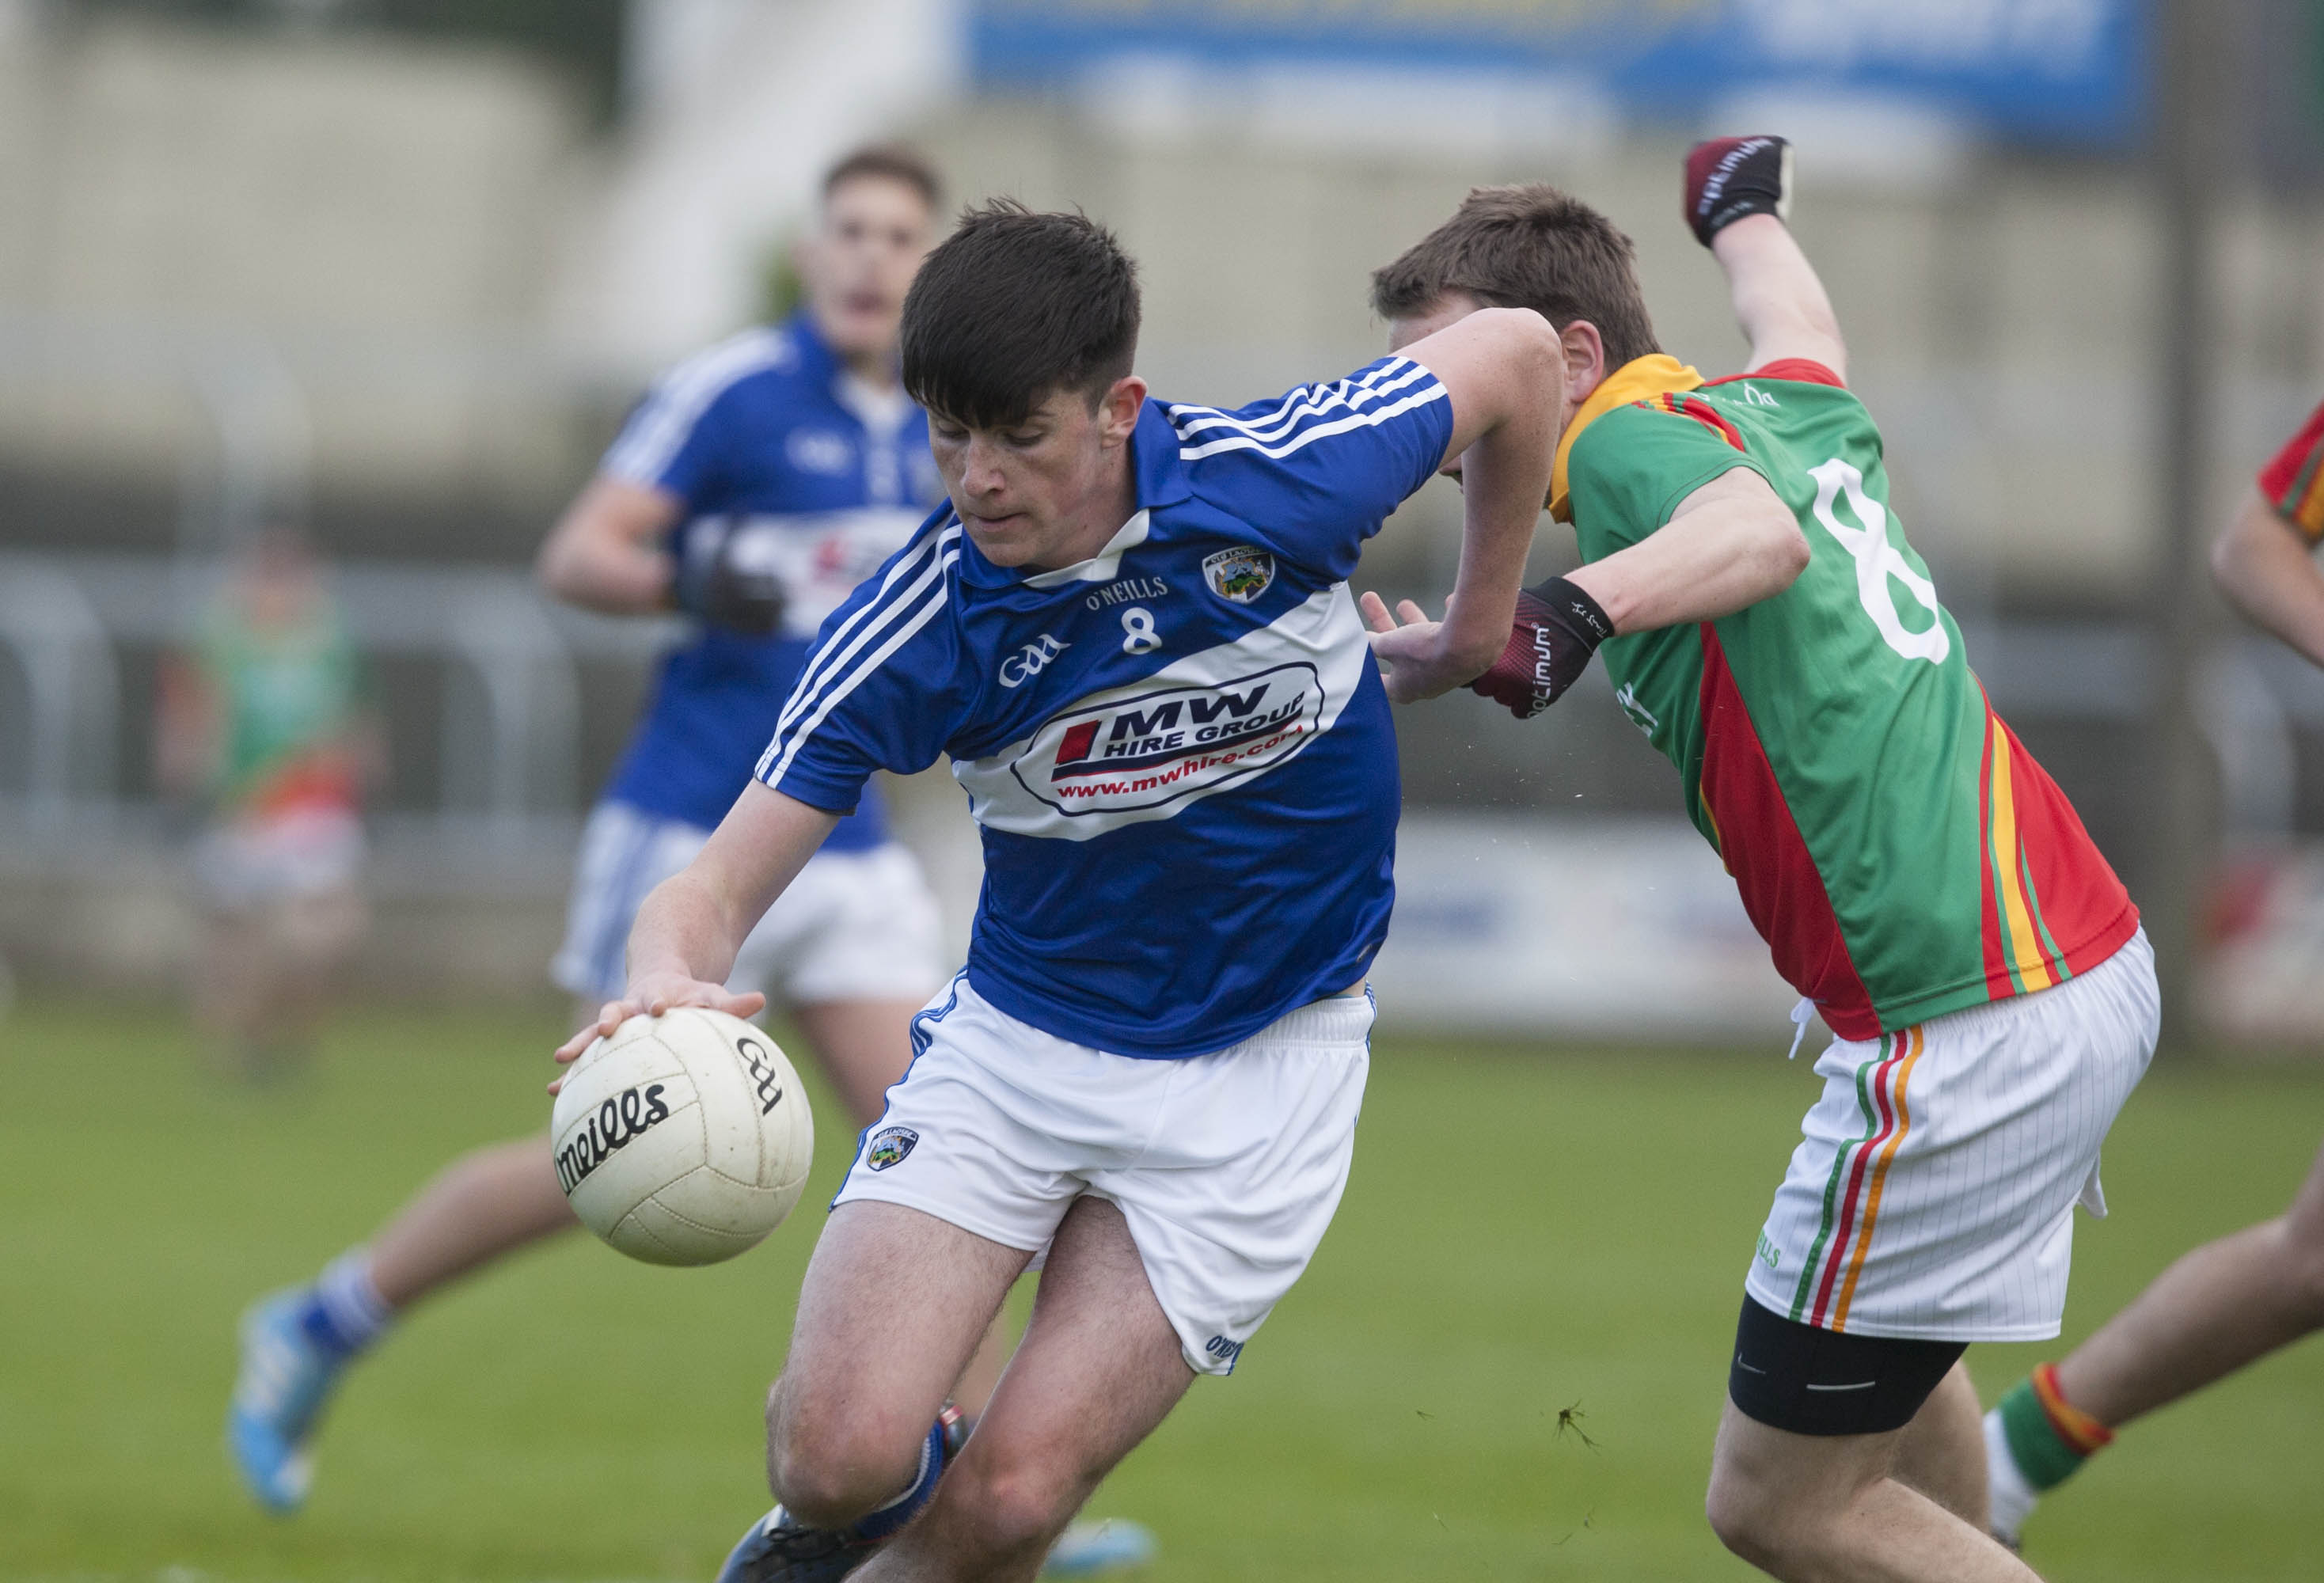 Laois U-21 captain Brian Daly will now play for St Joseph's after his transfer was granted